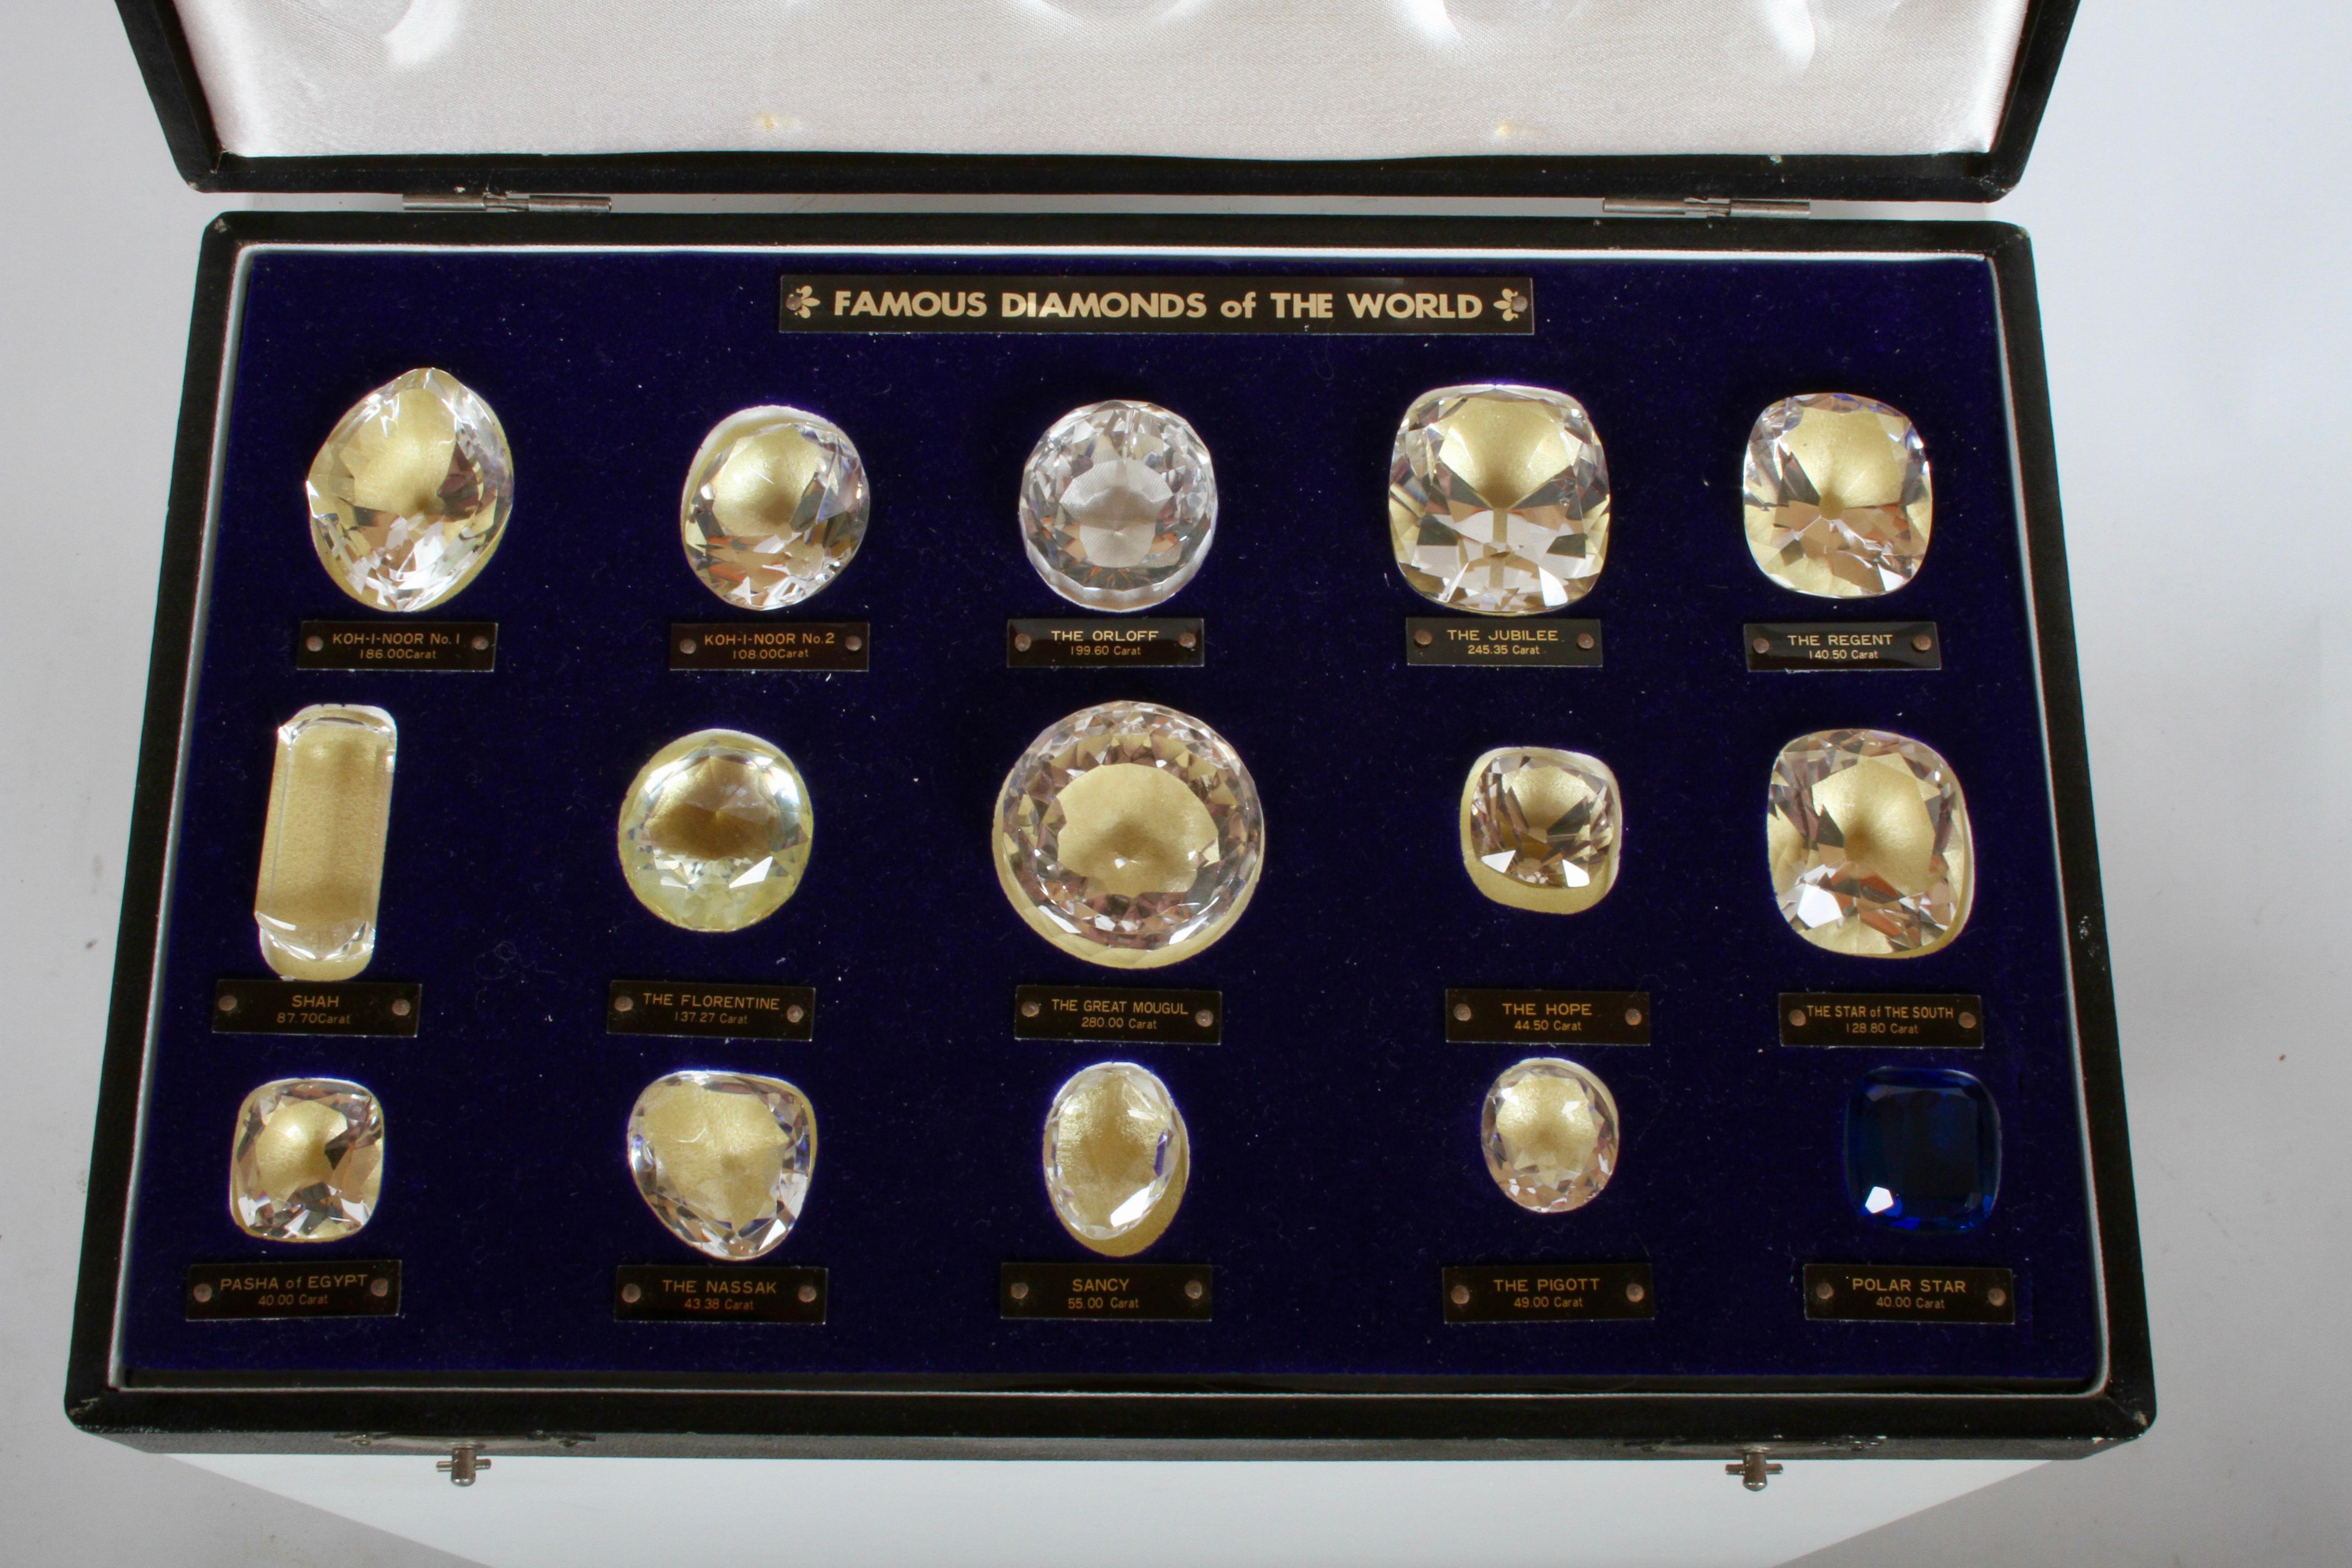 Belgian Antique Set of 15 Historical & Famous Diamonds of the World Replicas in a Case